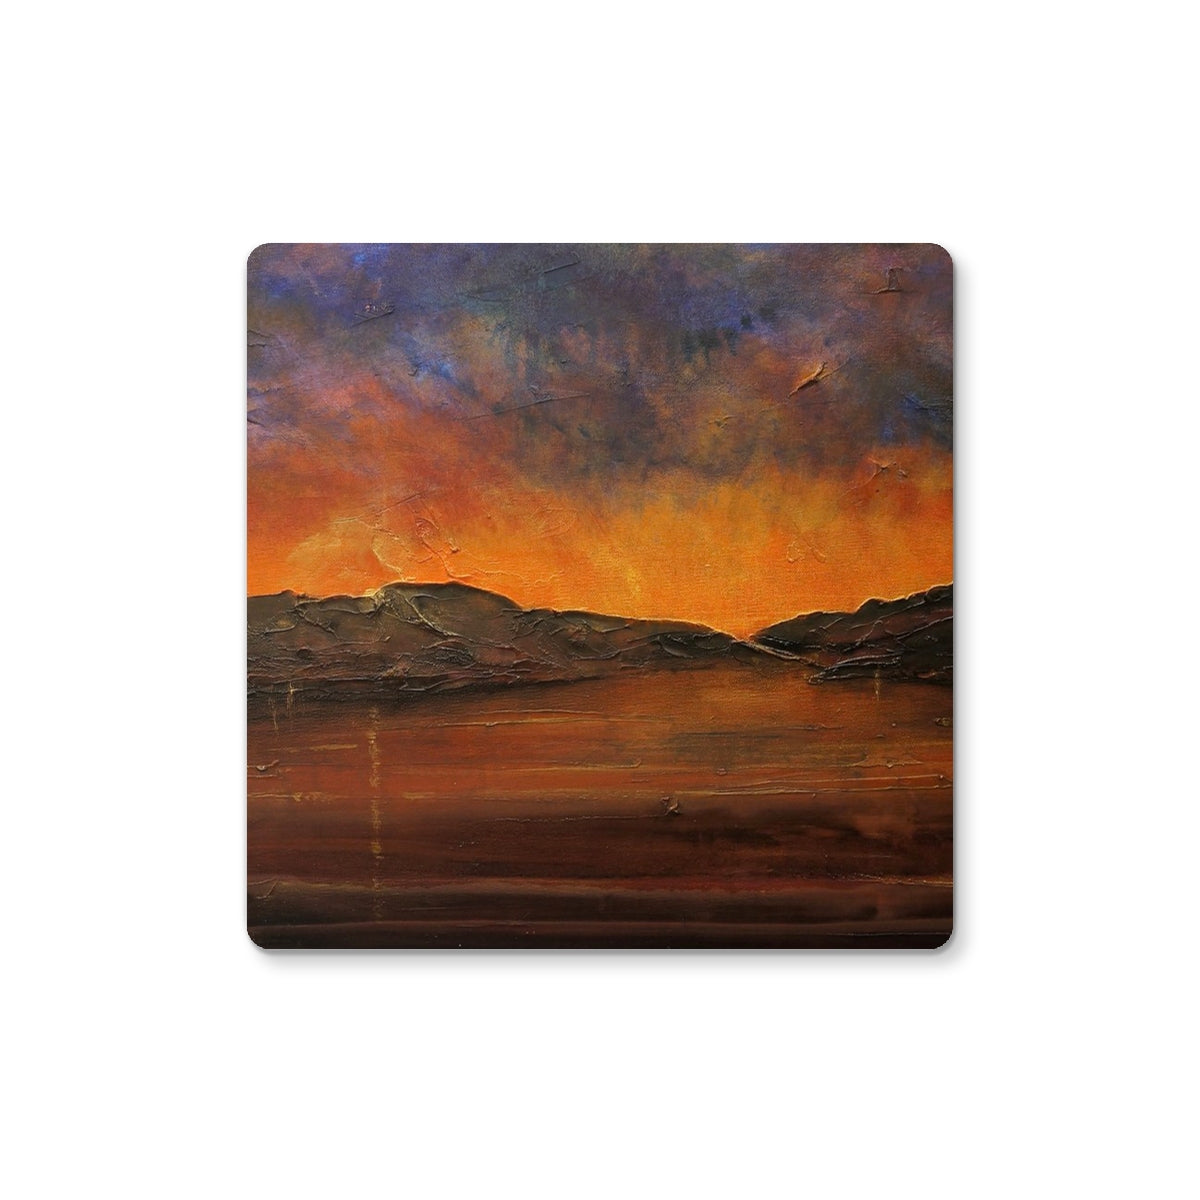 A Brooding Clyde Dusk Art Gifts Coaster-Homeware-River Clyde Art Gallery-4 Coasters-Paintings, Prints, Homeware, Art Gifts From Scotland By Scottish Artist Kevin Hunter